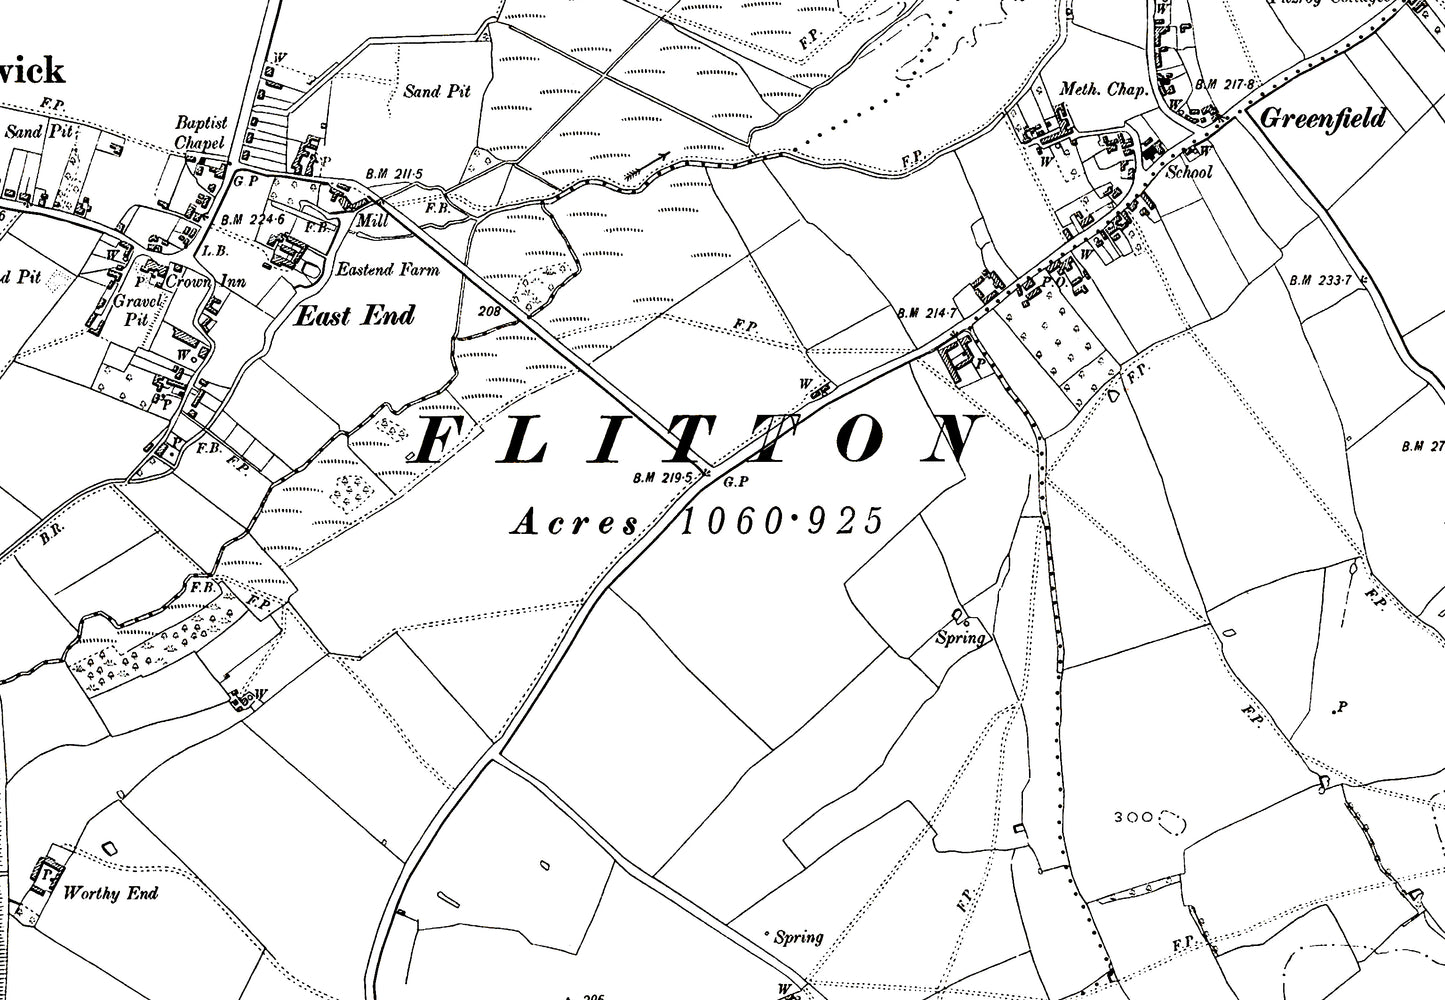 A 1901 map showing Flitwick, Flitton, Greenfield and Pulloxhill in Bedfordshire - A Digital Download 0f OS 1:10560 scale map, Beds 25NE